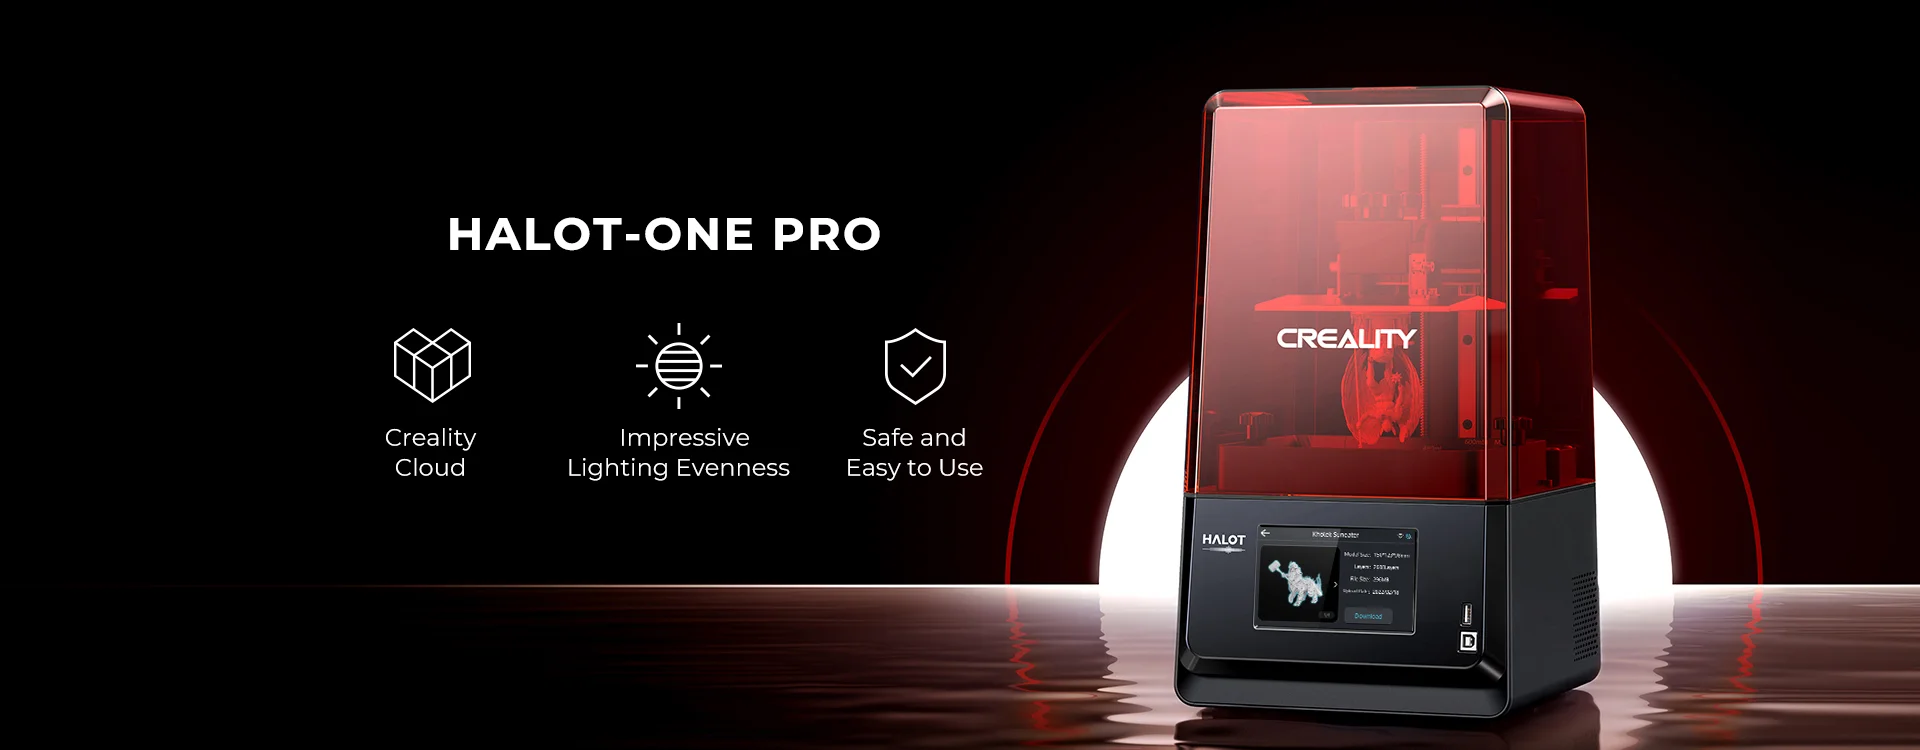 Creality Halot One Pro - electronics - by owner - sale - craigslist